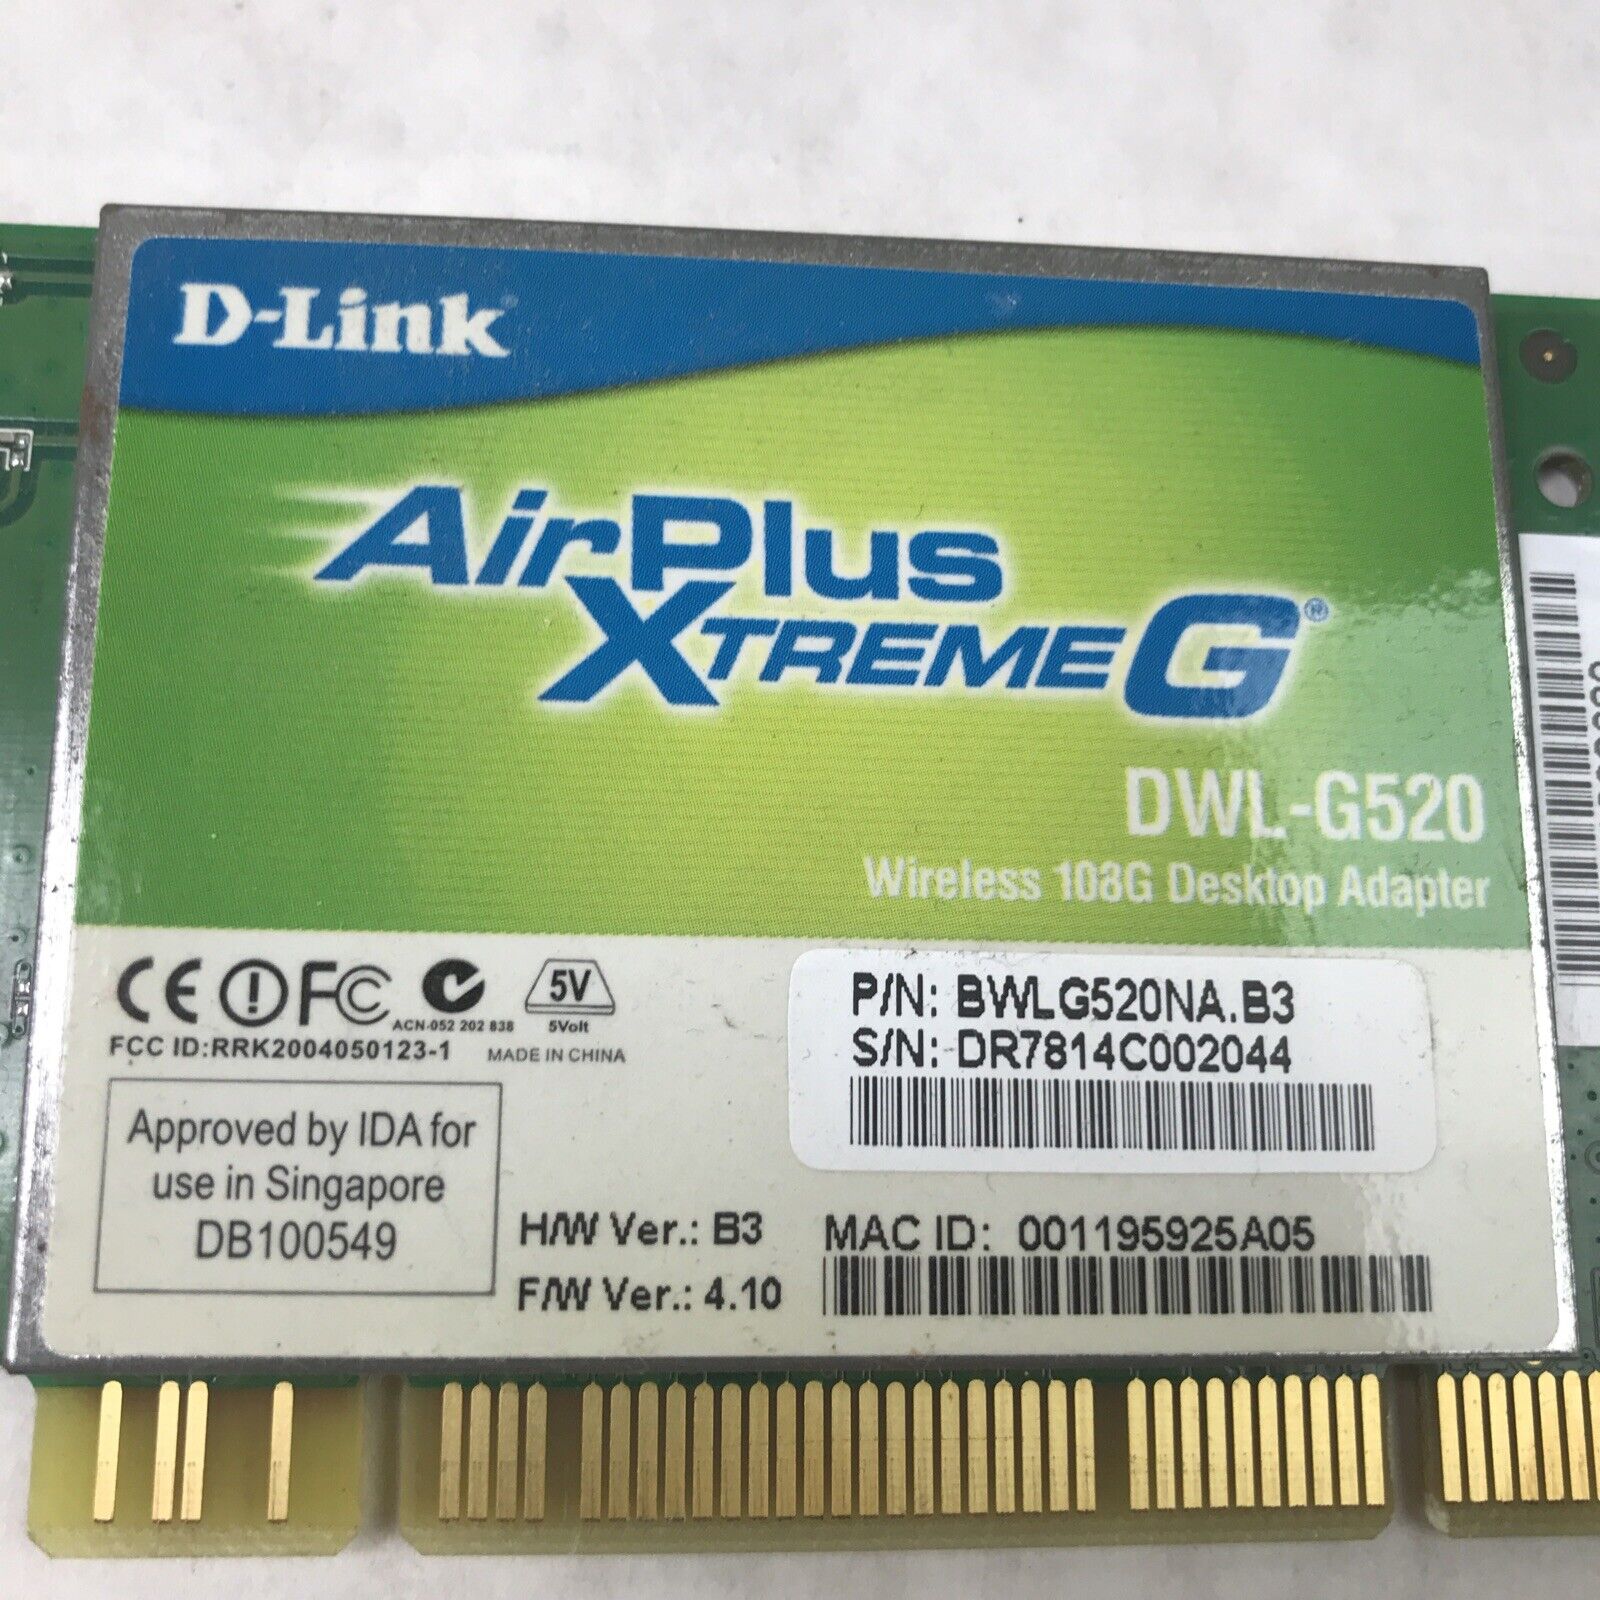 (Lot of 3) AirPlus XtremeG DWL-G520 PCI Wireless Card D-Link (Tested and Working